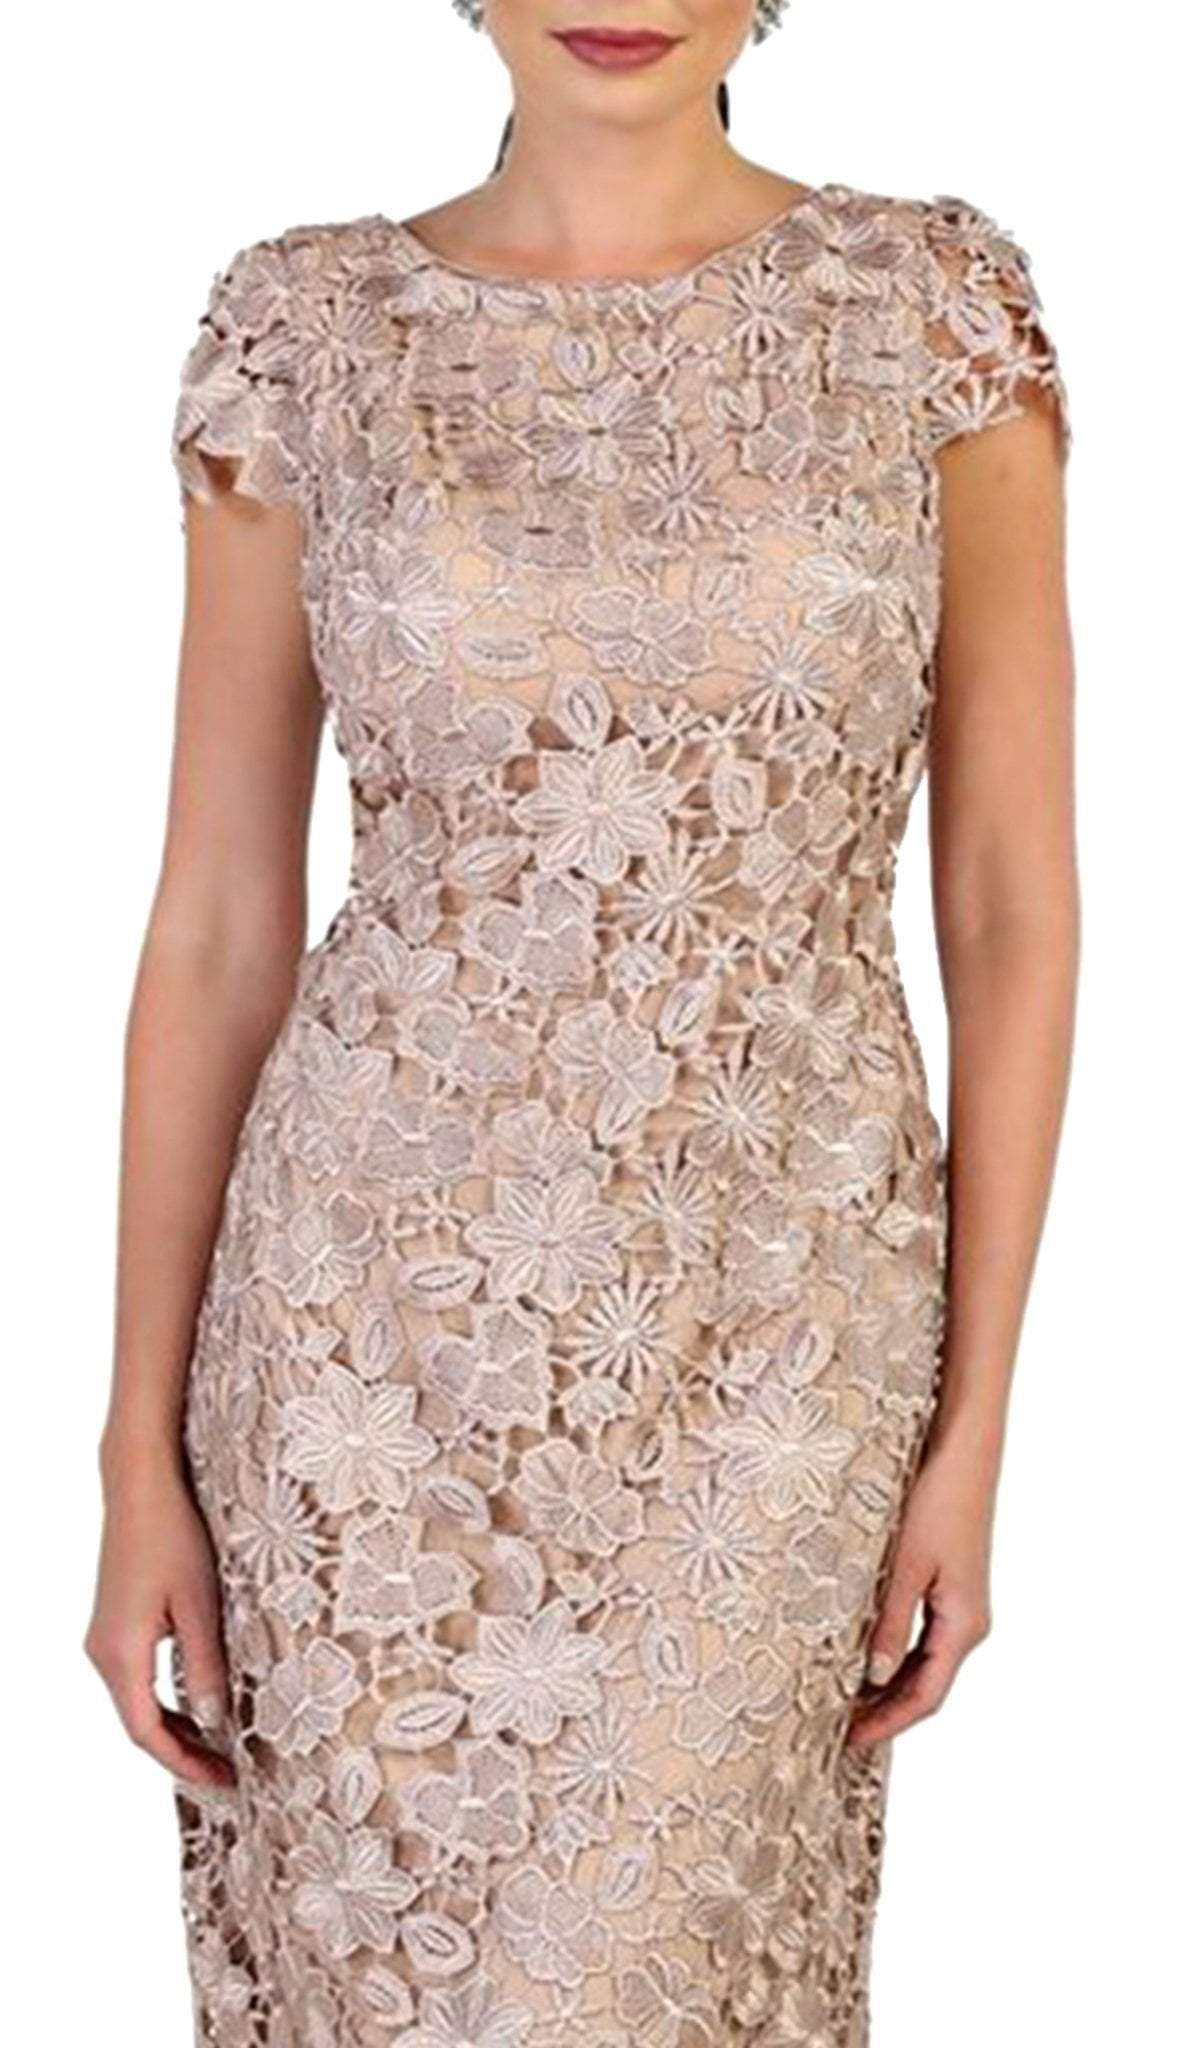 May Queen - MQ1488 Floral Lace Overlaid Sheath Mother of the Bride Dress Mother of the Bride Dresses